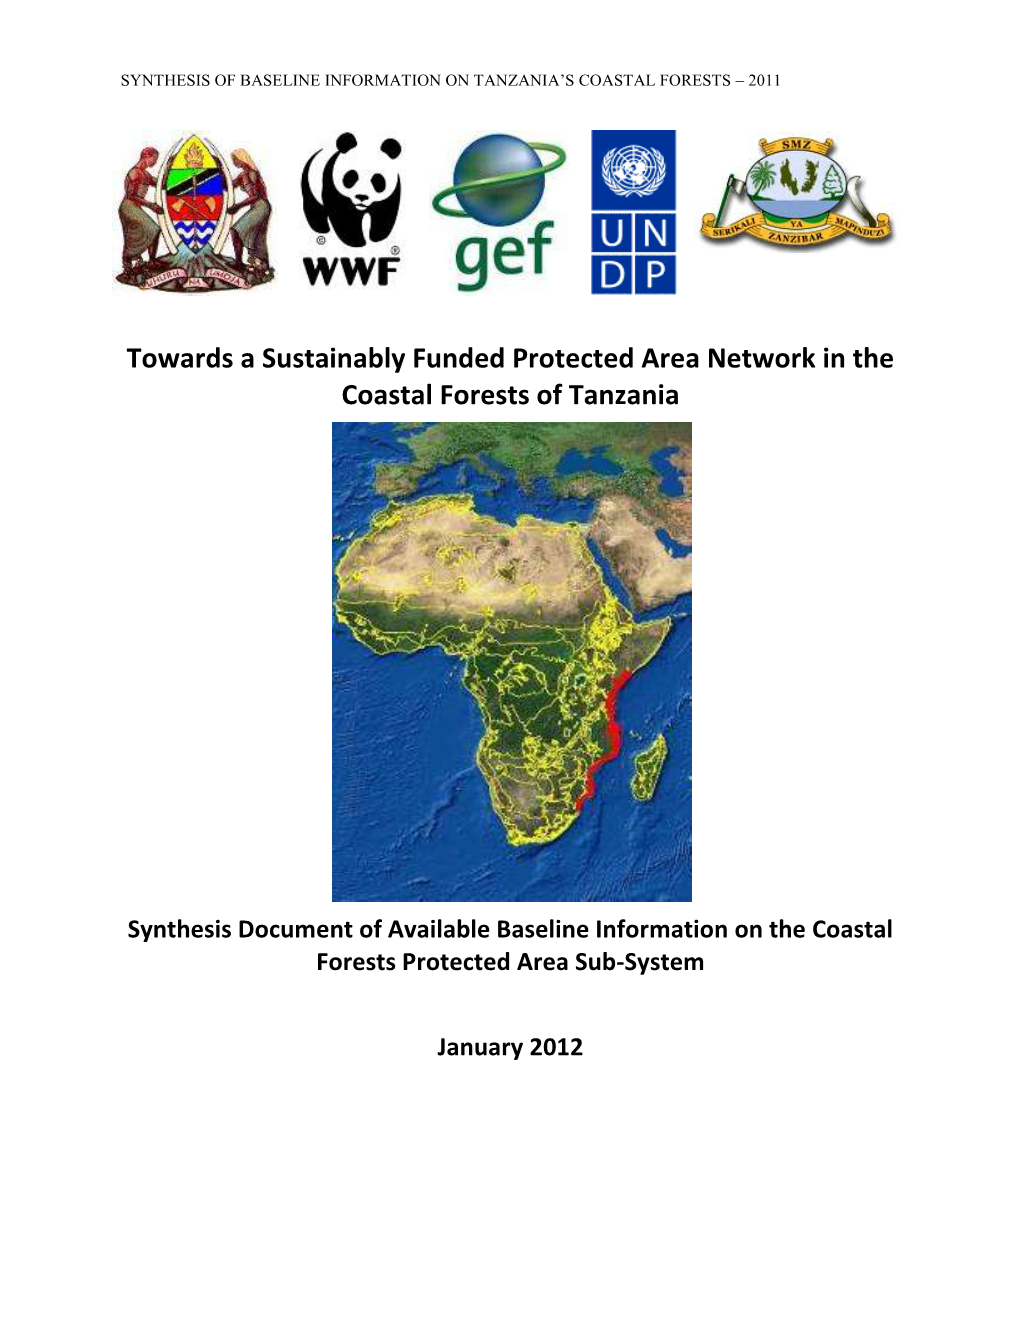 Towards a Sustainably Funded Protected Area Network in the Coastal Forests of Tanzania